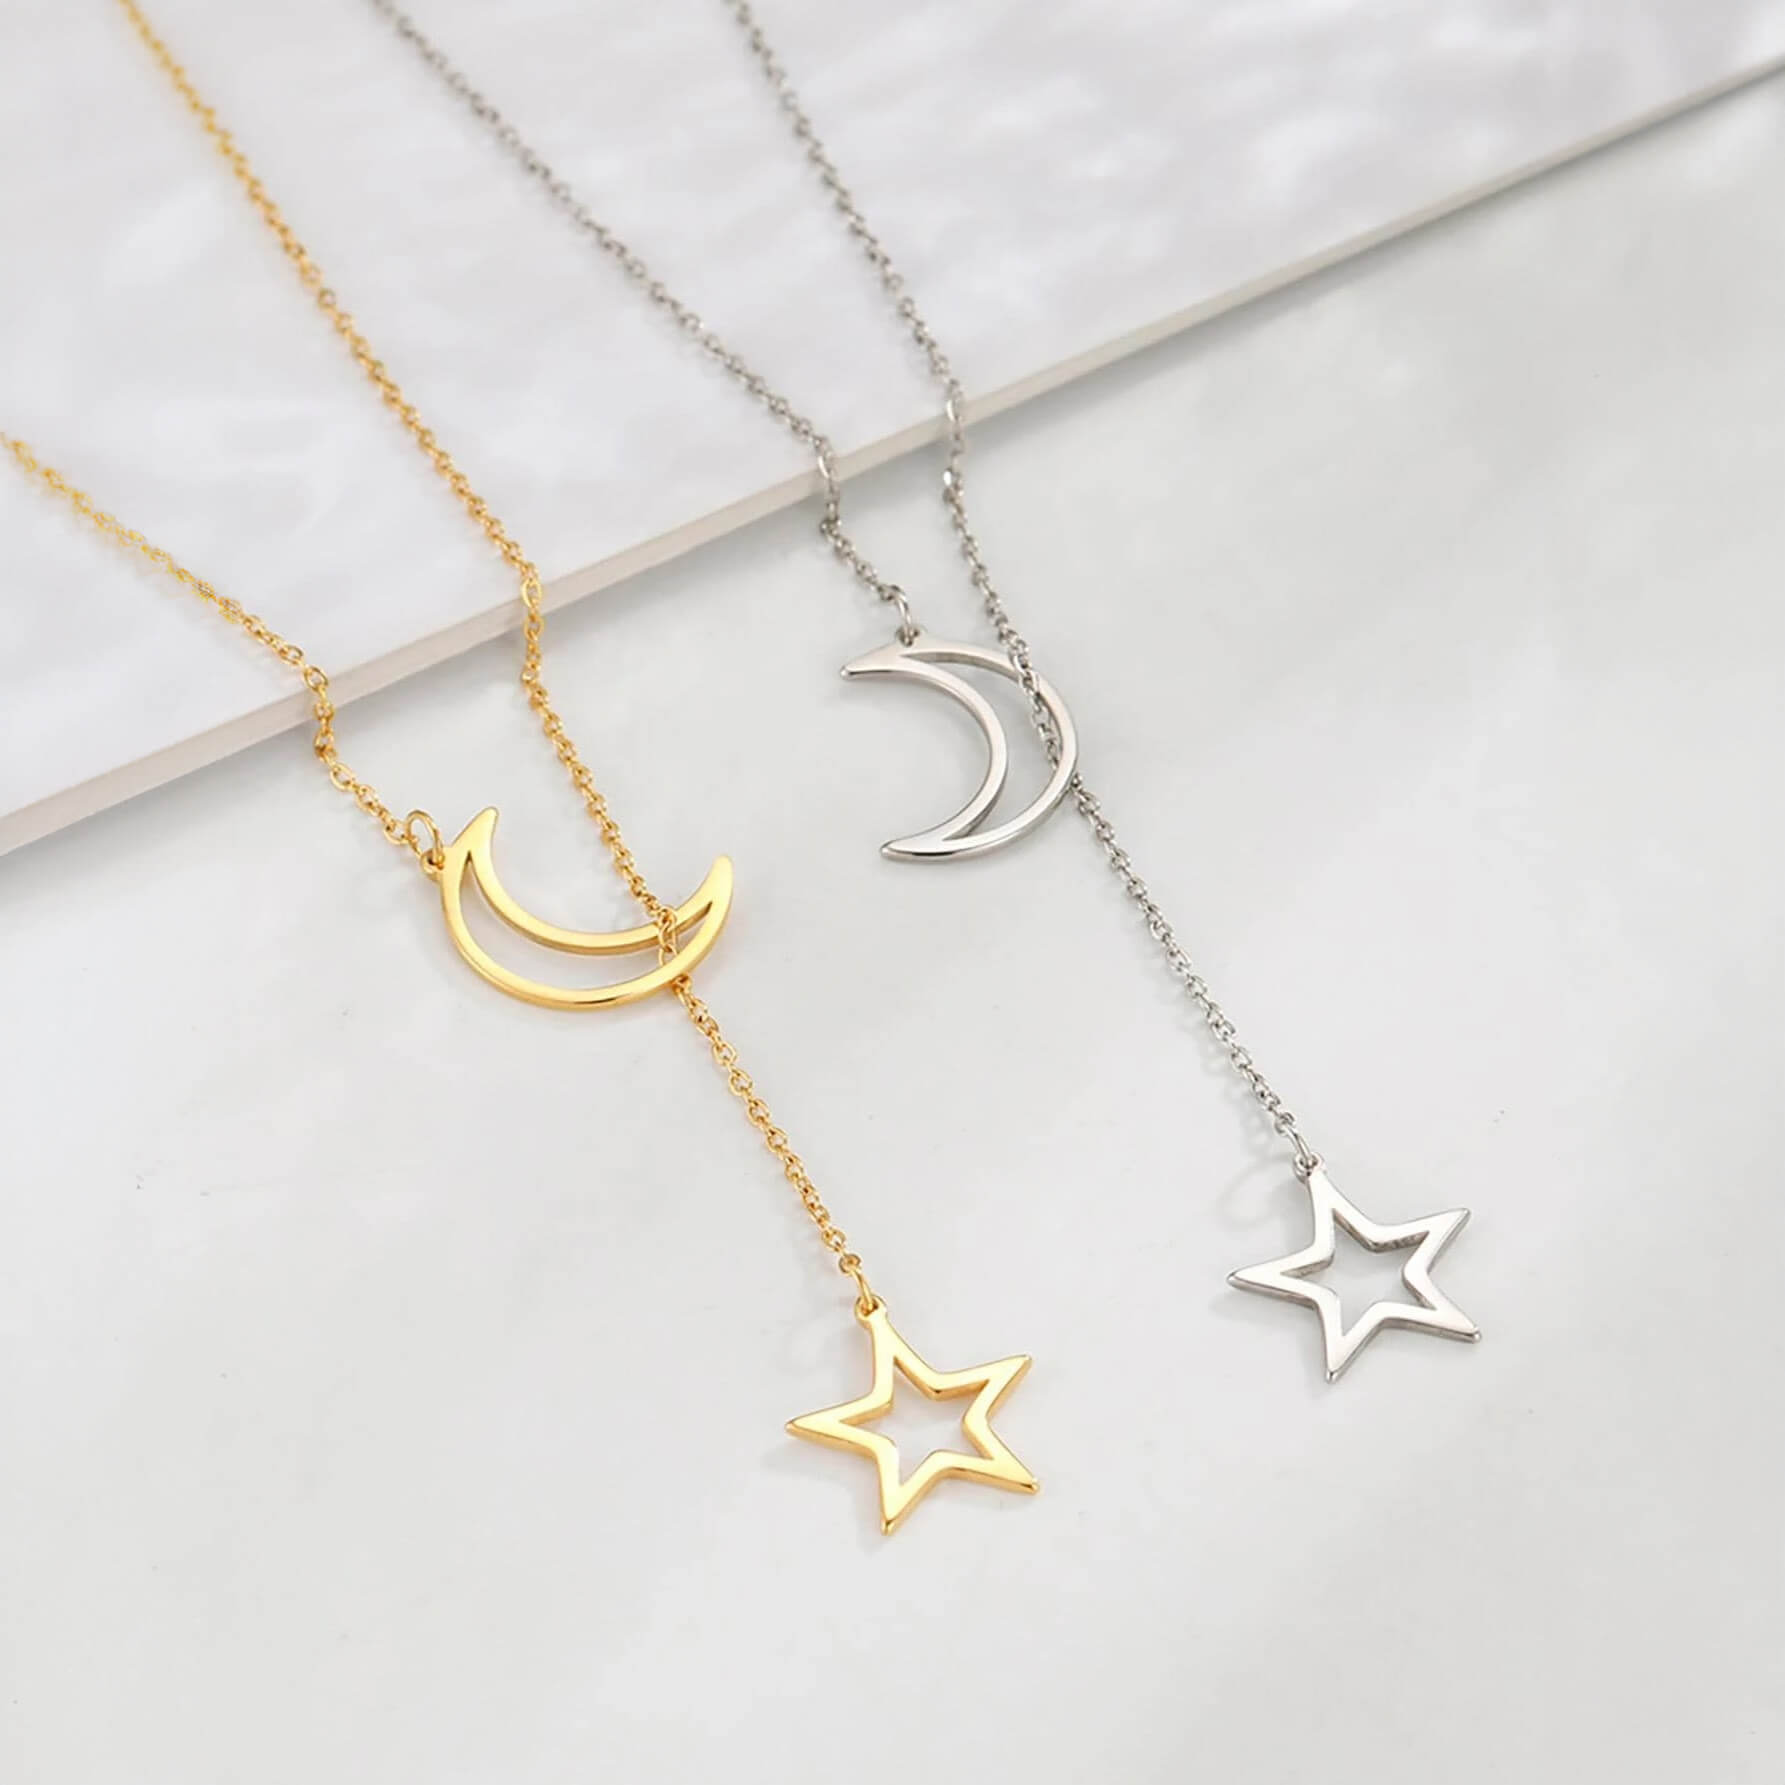 Stellar-Skeleton-Silver-Gold-Asymmetrical-Moon-and-Star-Necklace